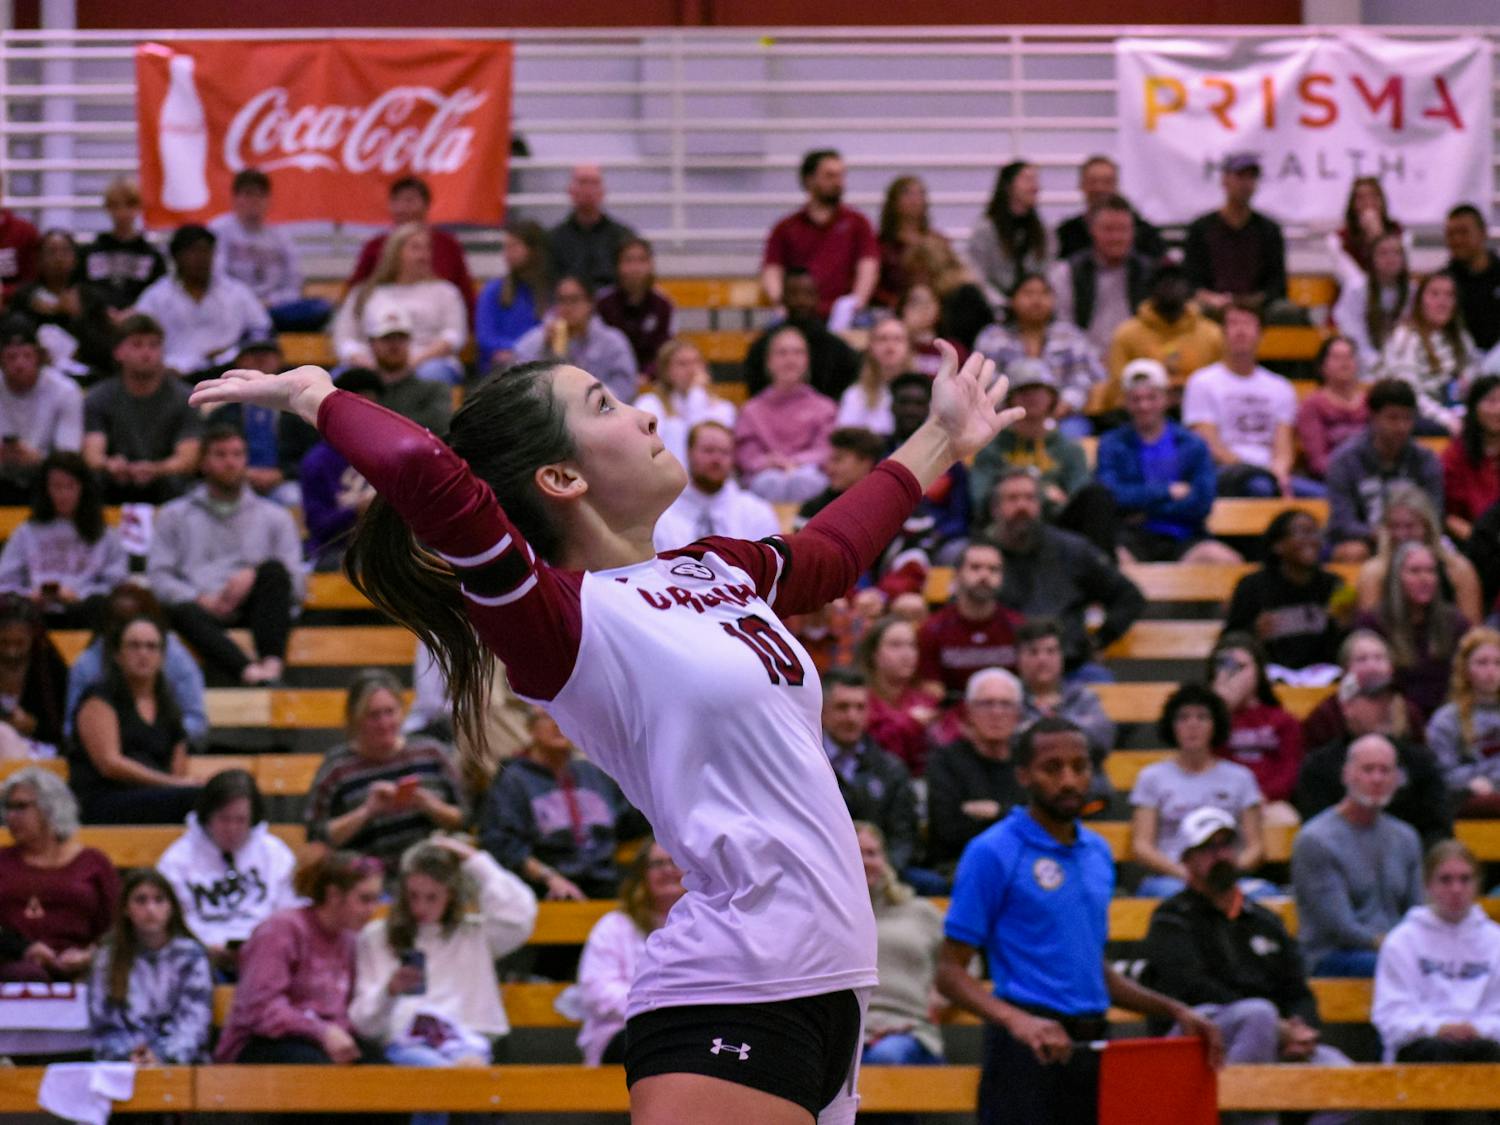 The South Carolina volleyball team battled Mississippi State Wednesday night Oct. 19, 2022, in a back-and-forth bout that ended with a win for Carolina. South Carolina defeated Mississippi State 3-2. &nbsp;The&nbsp;South Carolina volleyball team rallied in the fifth set after beginning the match 2-0 to defeat Mississippi State. Despite trouble with offense errors, the Gamecocks improve to 4-4 in the SEC. Photos captured by Hannah Flint | The Daily Gamecock.